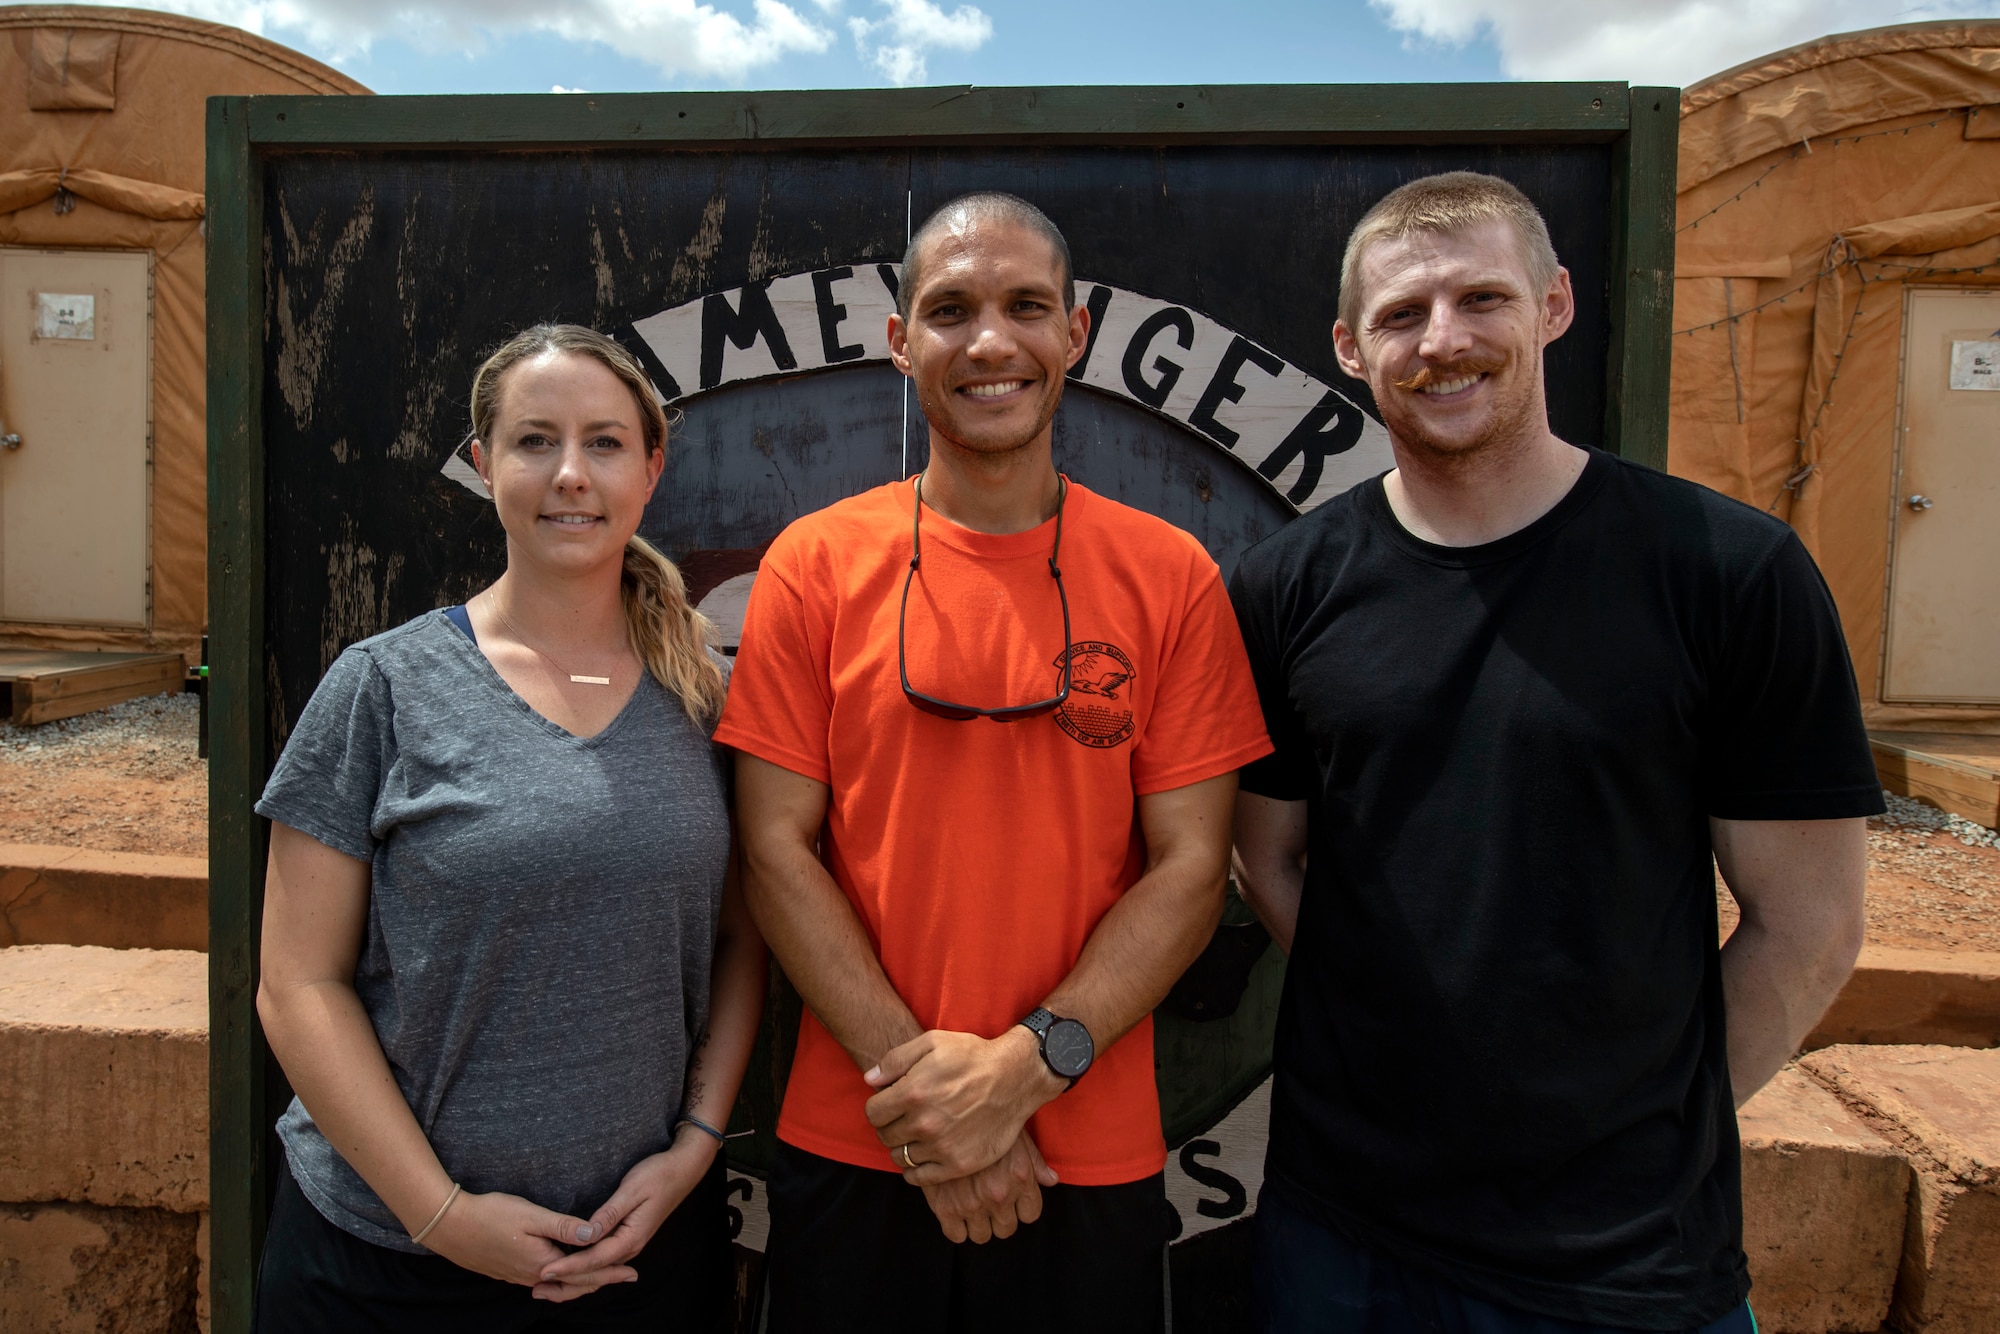 U.S. Air Force Capt. Melanie Gates, left, Capt. Nick McKenzie, and Capt. Richard Thorsted, all who are Special Operations Command Forward Northwest Africa ground surgical team members, gather for a photo at Nigerien Air Base 101, Niamey, Niger, on June 21, 2018. The three doctors recently finished medical school and are serving their first deployment. They are deployed from Travis Air Force Base, California.  (U.S. Air Force courtesy photo)